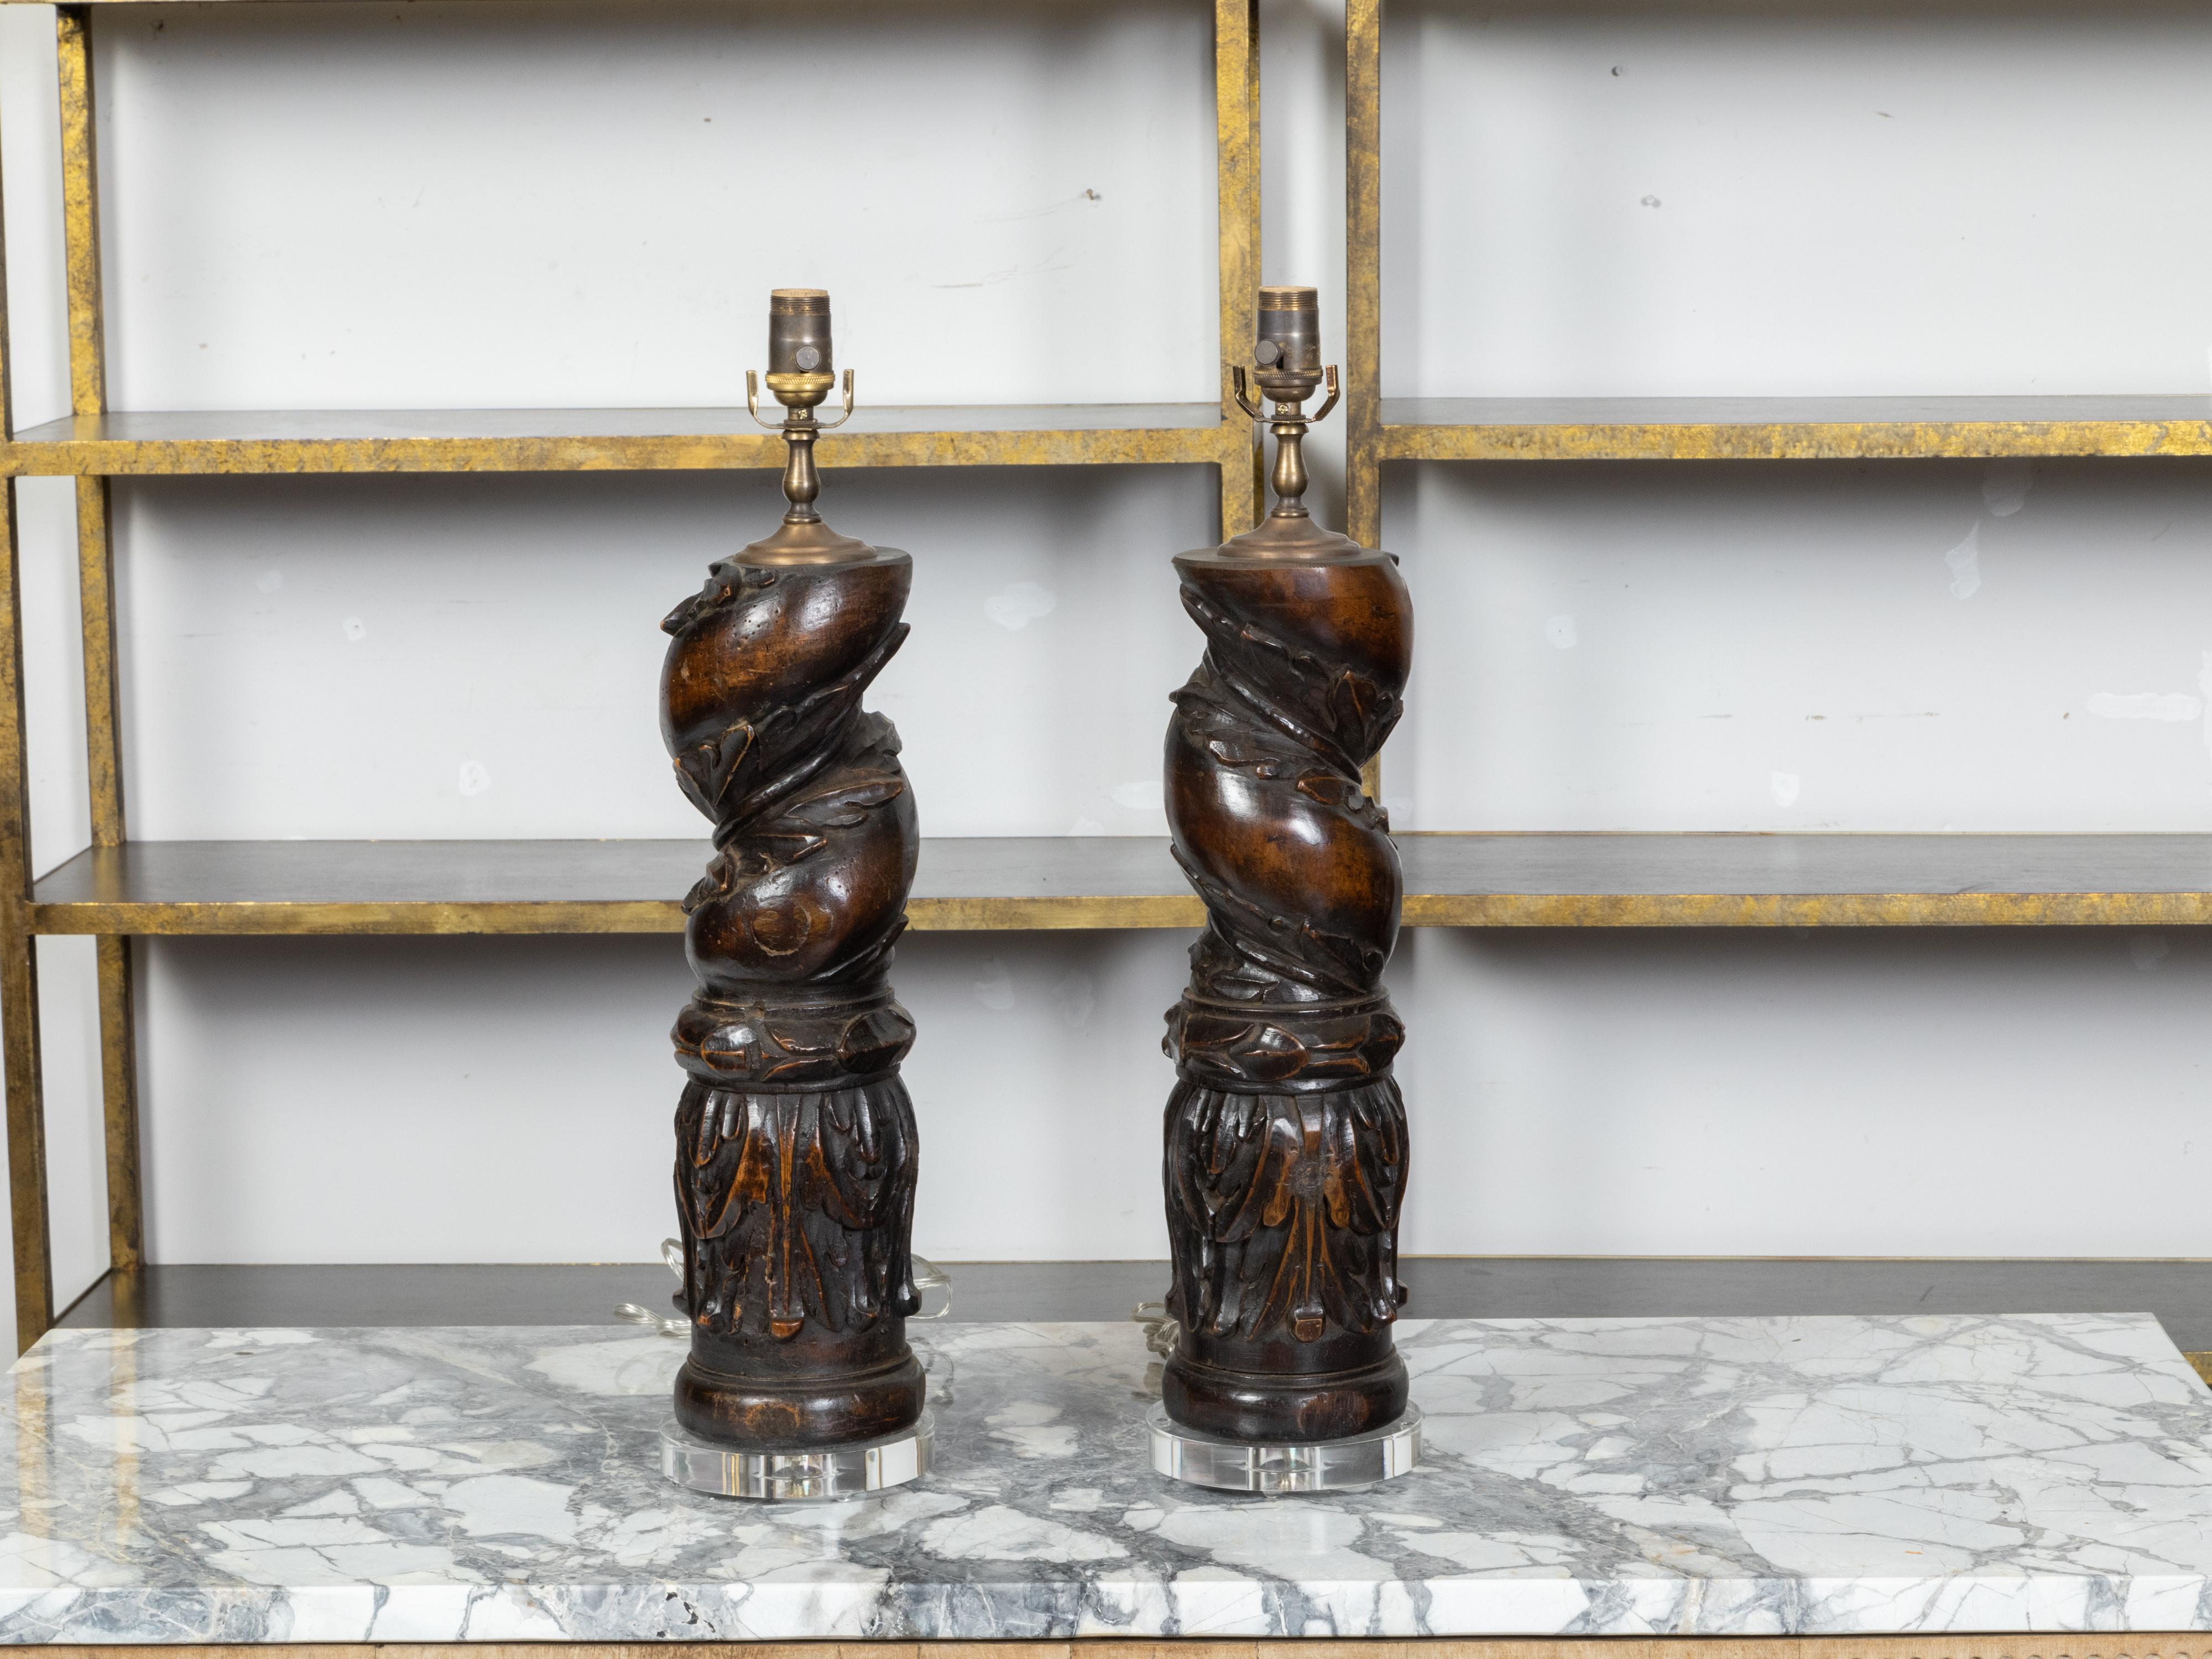 A pair of Italian carved walnut fragments from the 19th century depicting Solomonic columns wrapped with foliage and acanthus leaves, and made into modern US-wired table lamps on lucite bases. Created in Italy during the 19th century, each of this